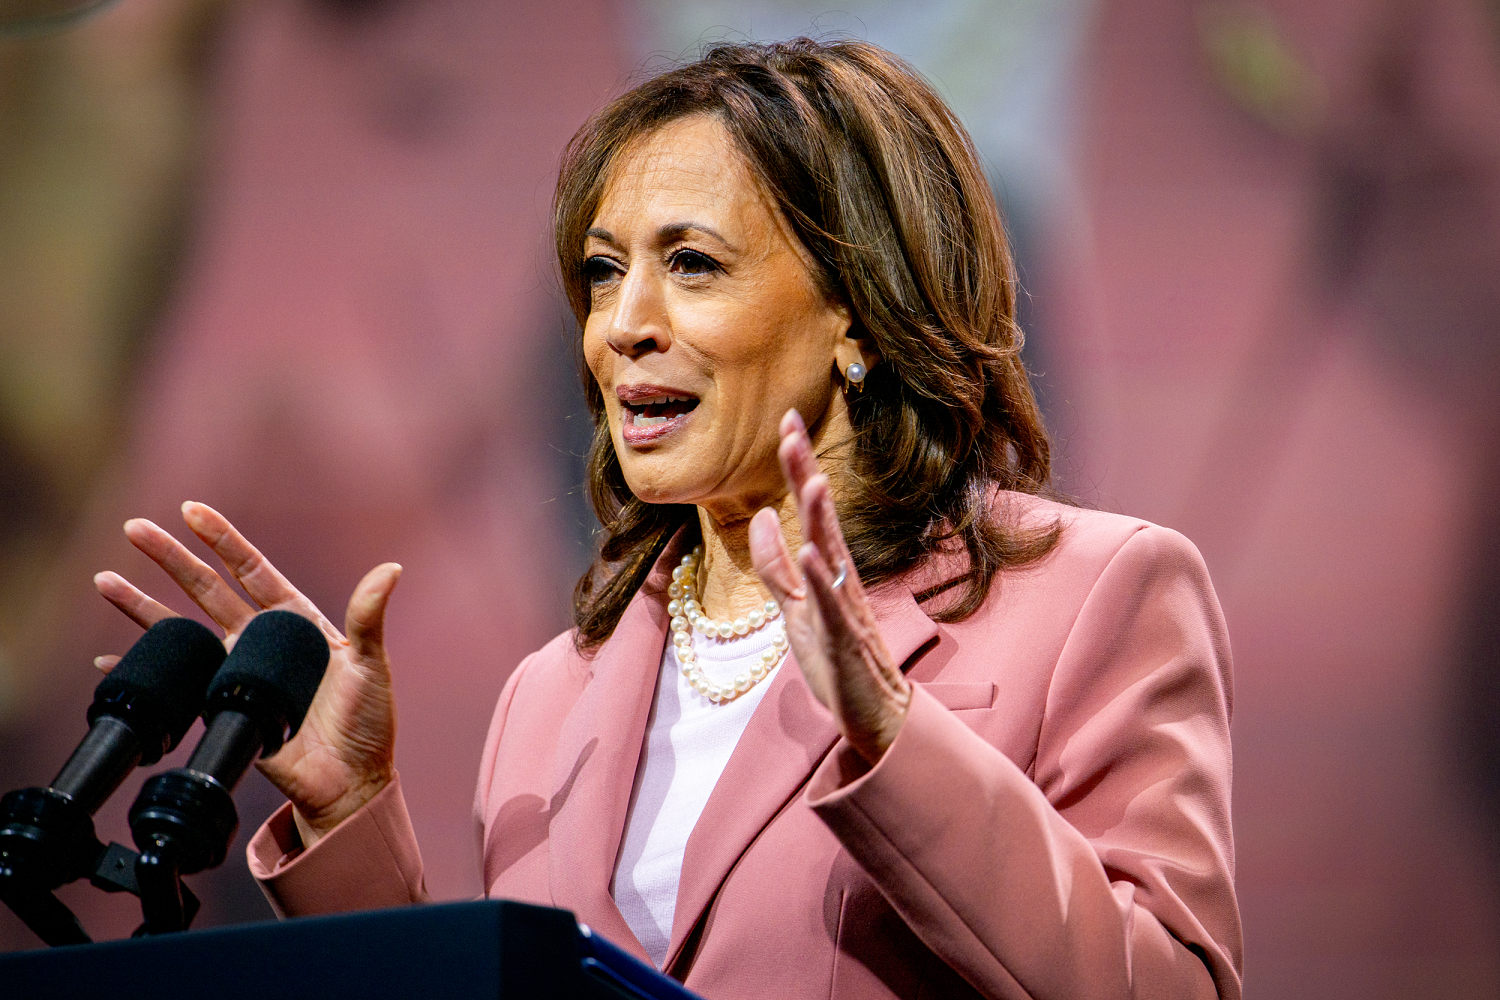 Liberal groups are finding Kamala Harris polls well with some groups as Biden struggles